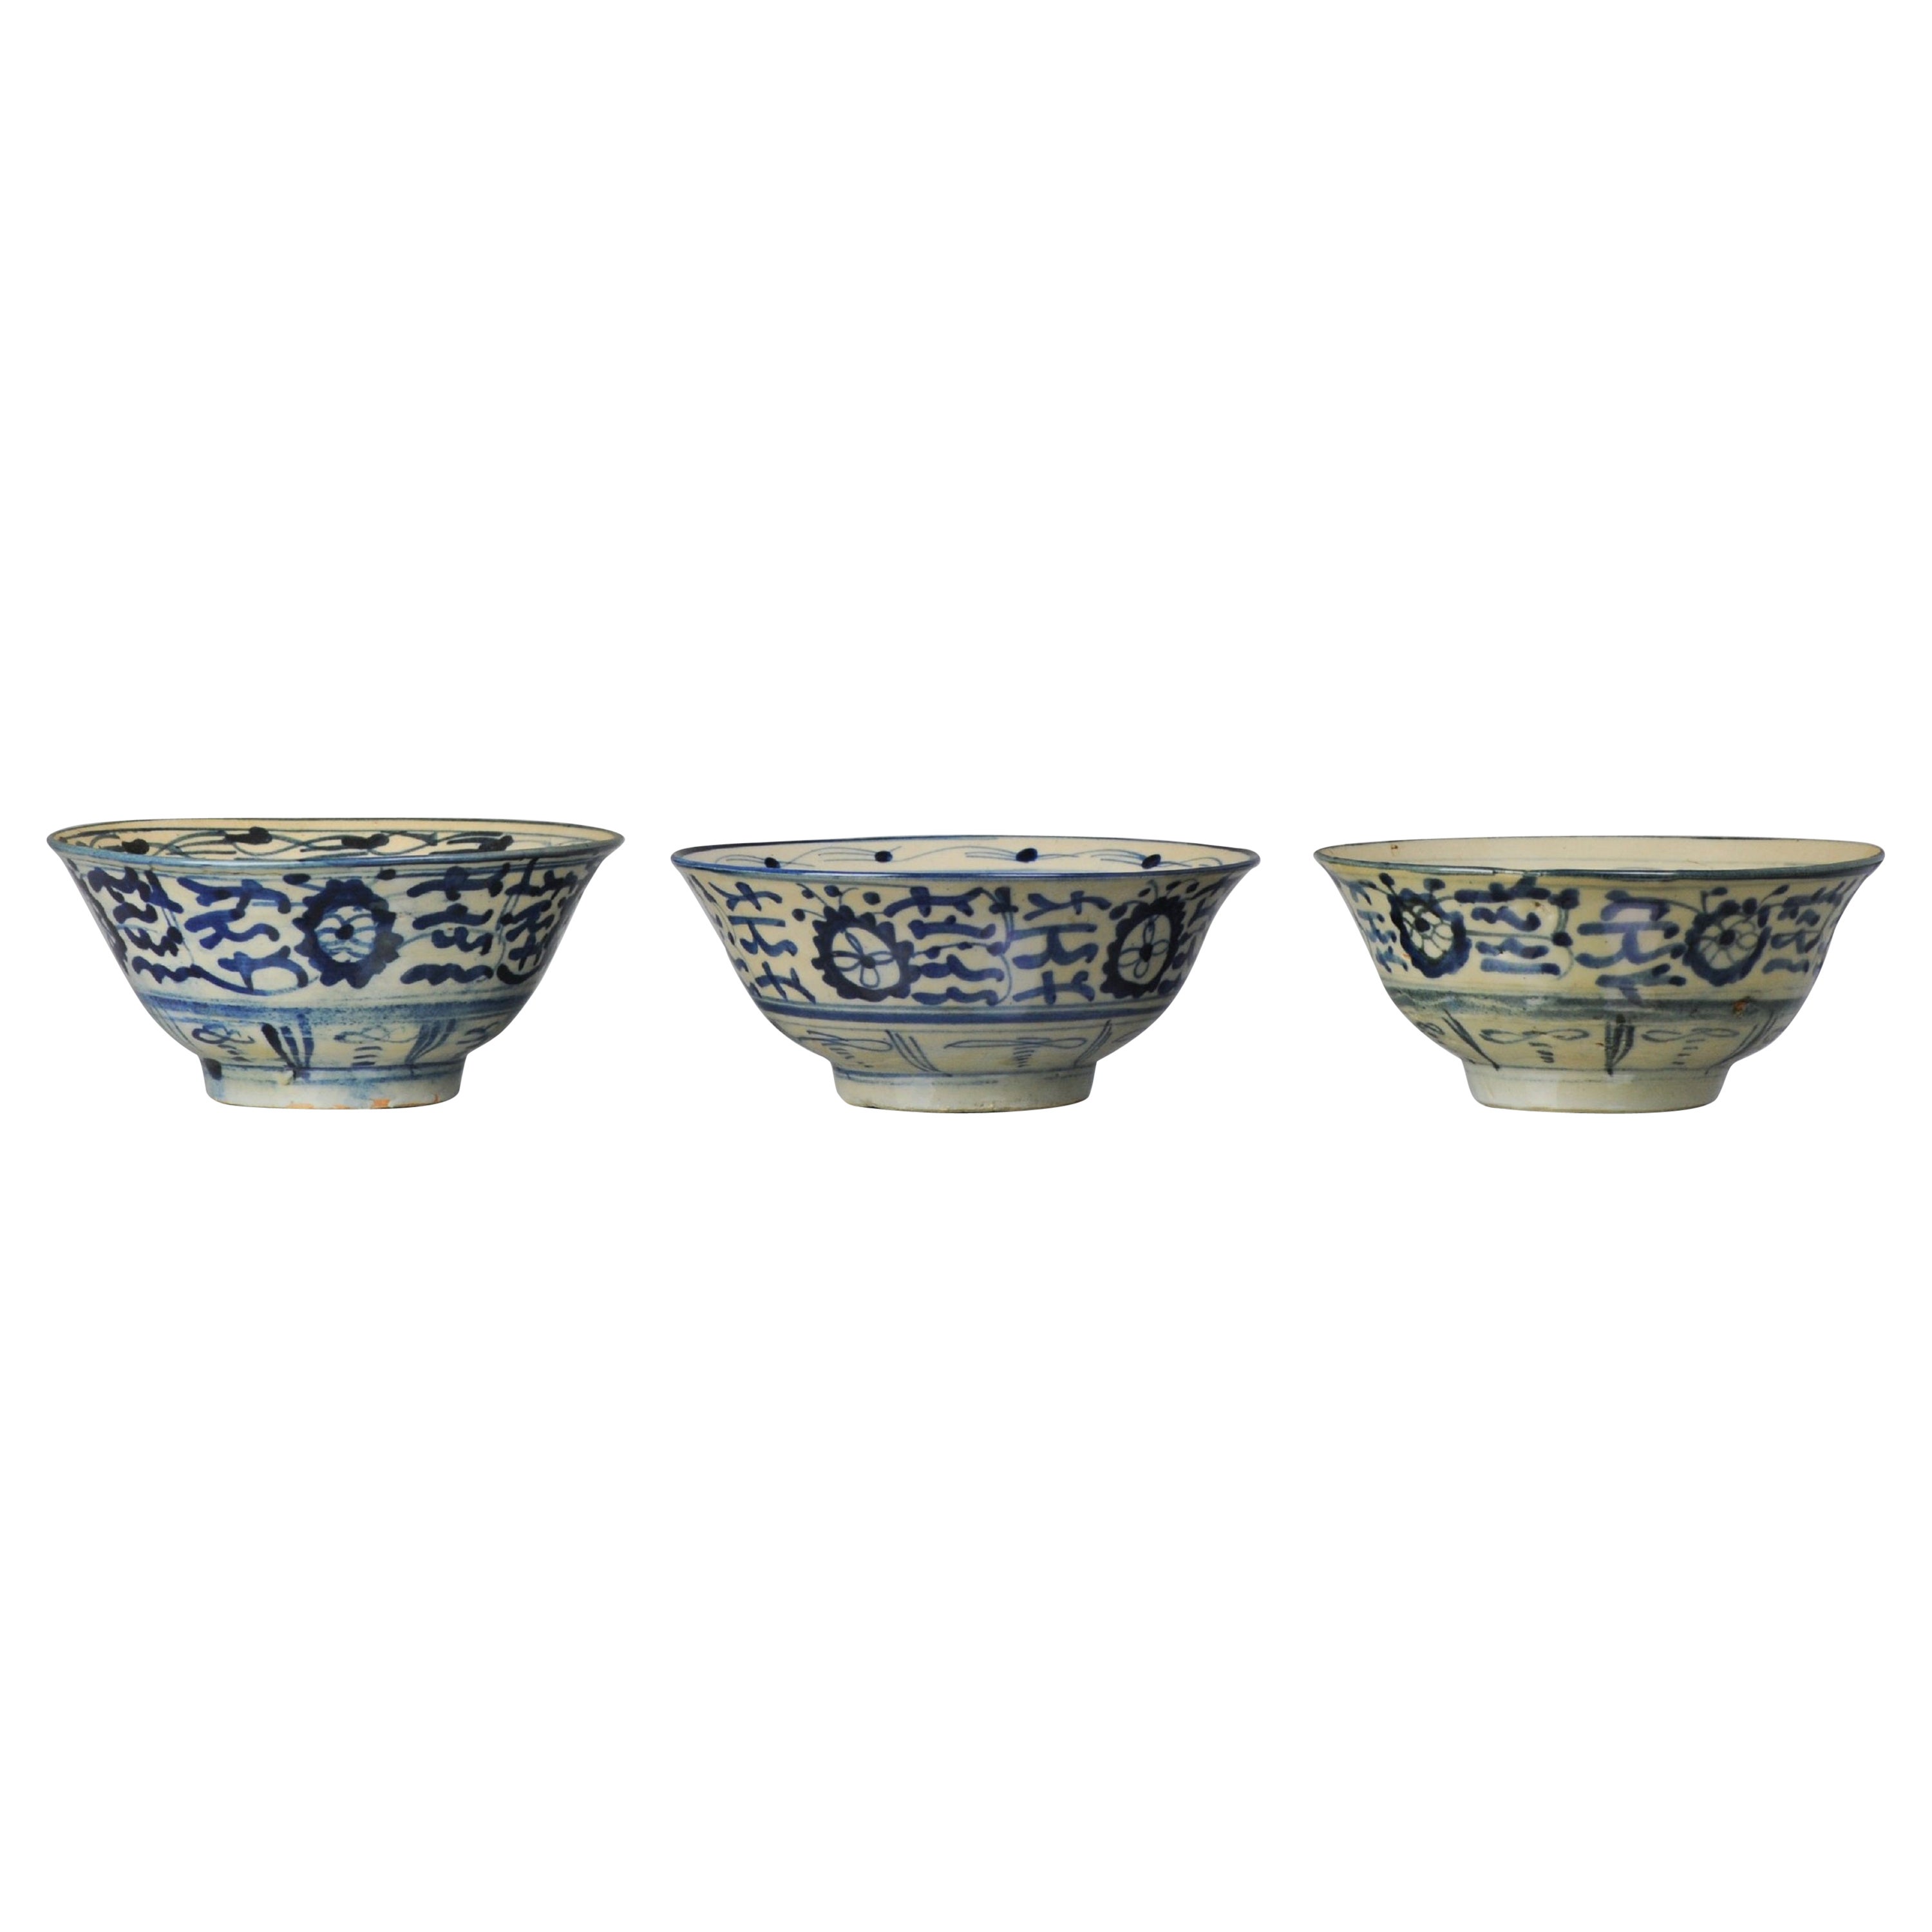 Set of 3 Large Chinese Porcelain Kitchen Qing Bowls South East Asia, 19th Cen